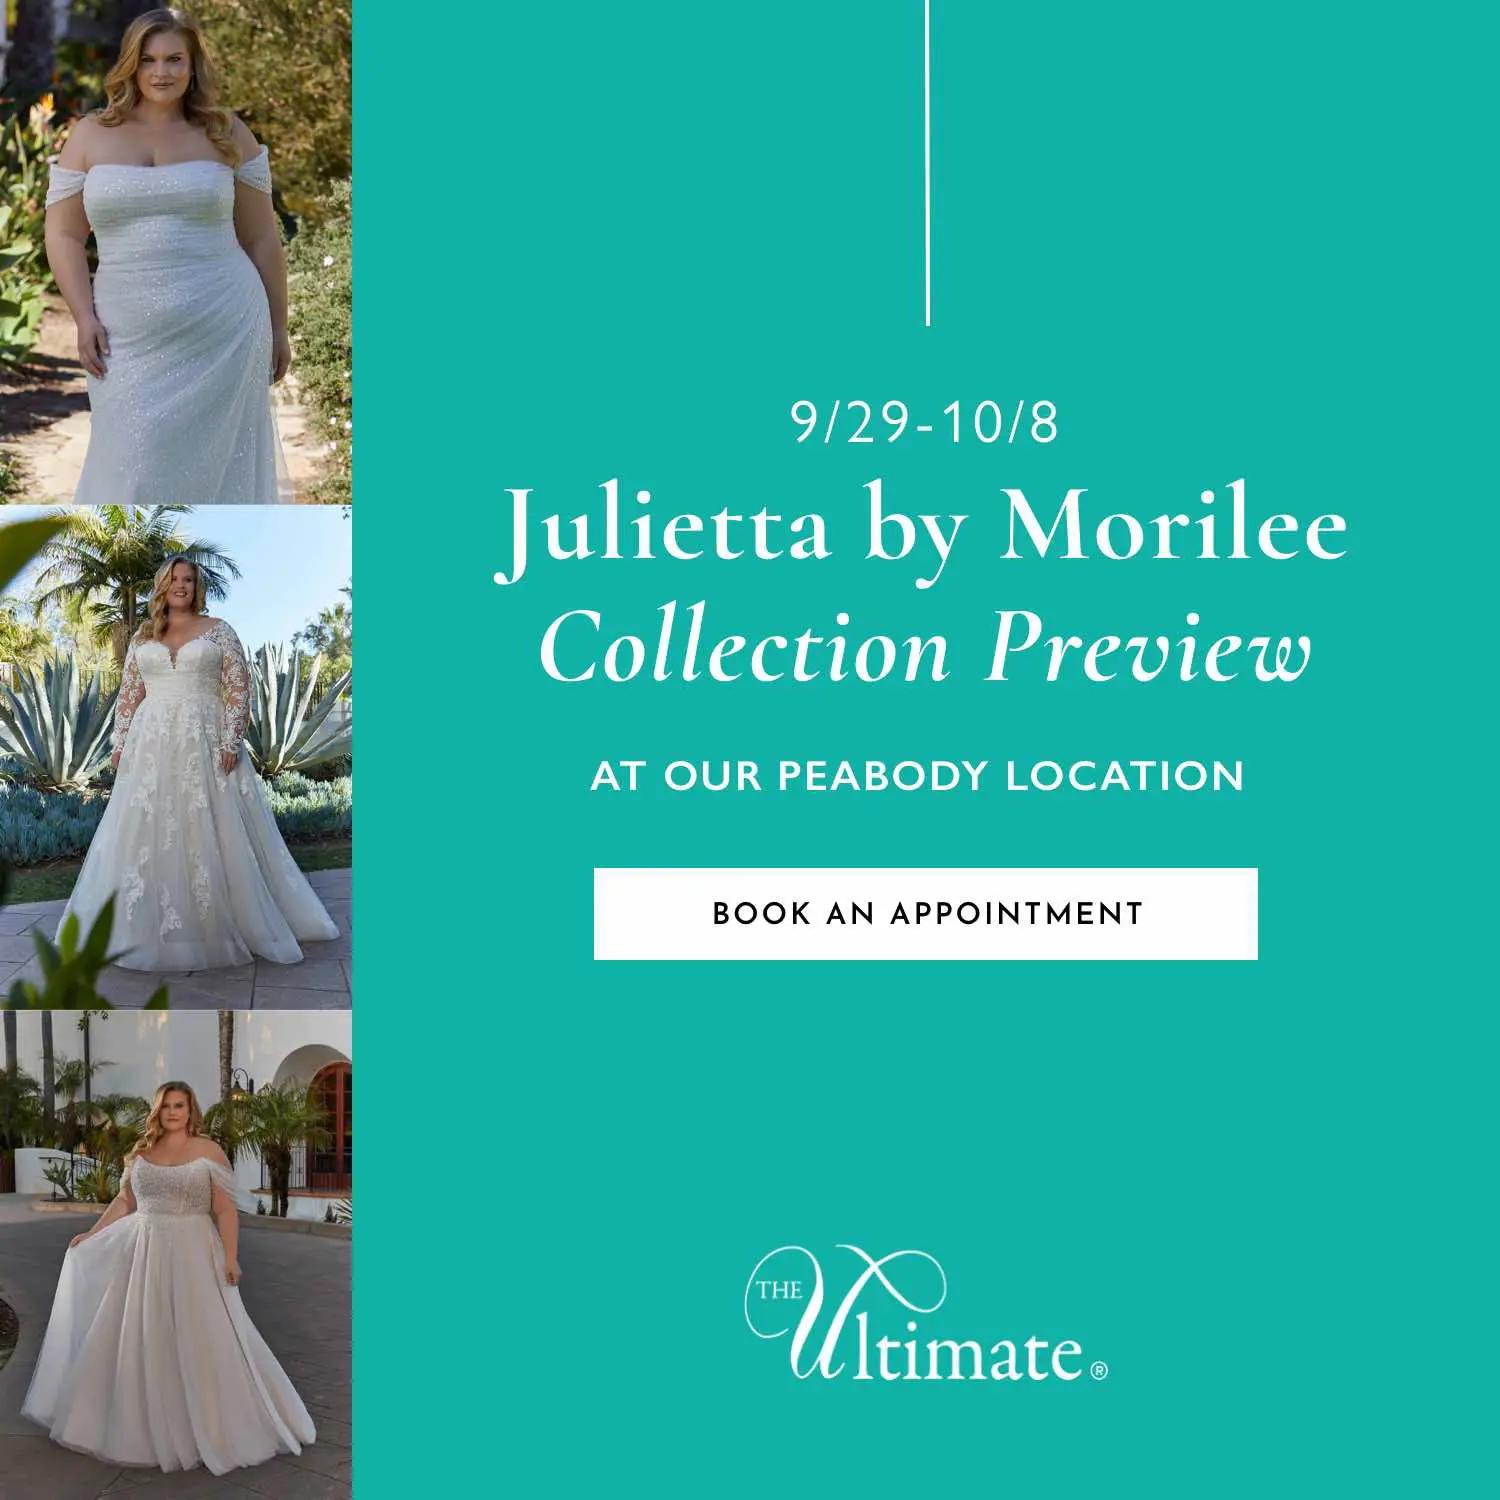 Julietta by Morilee collection preview at The Ultimate Peabody